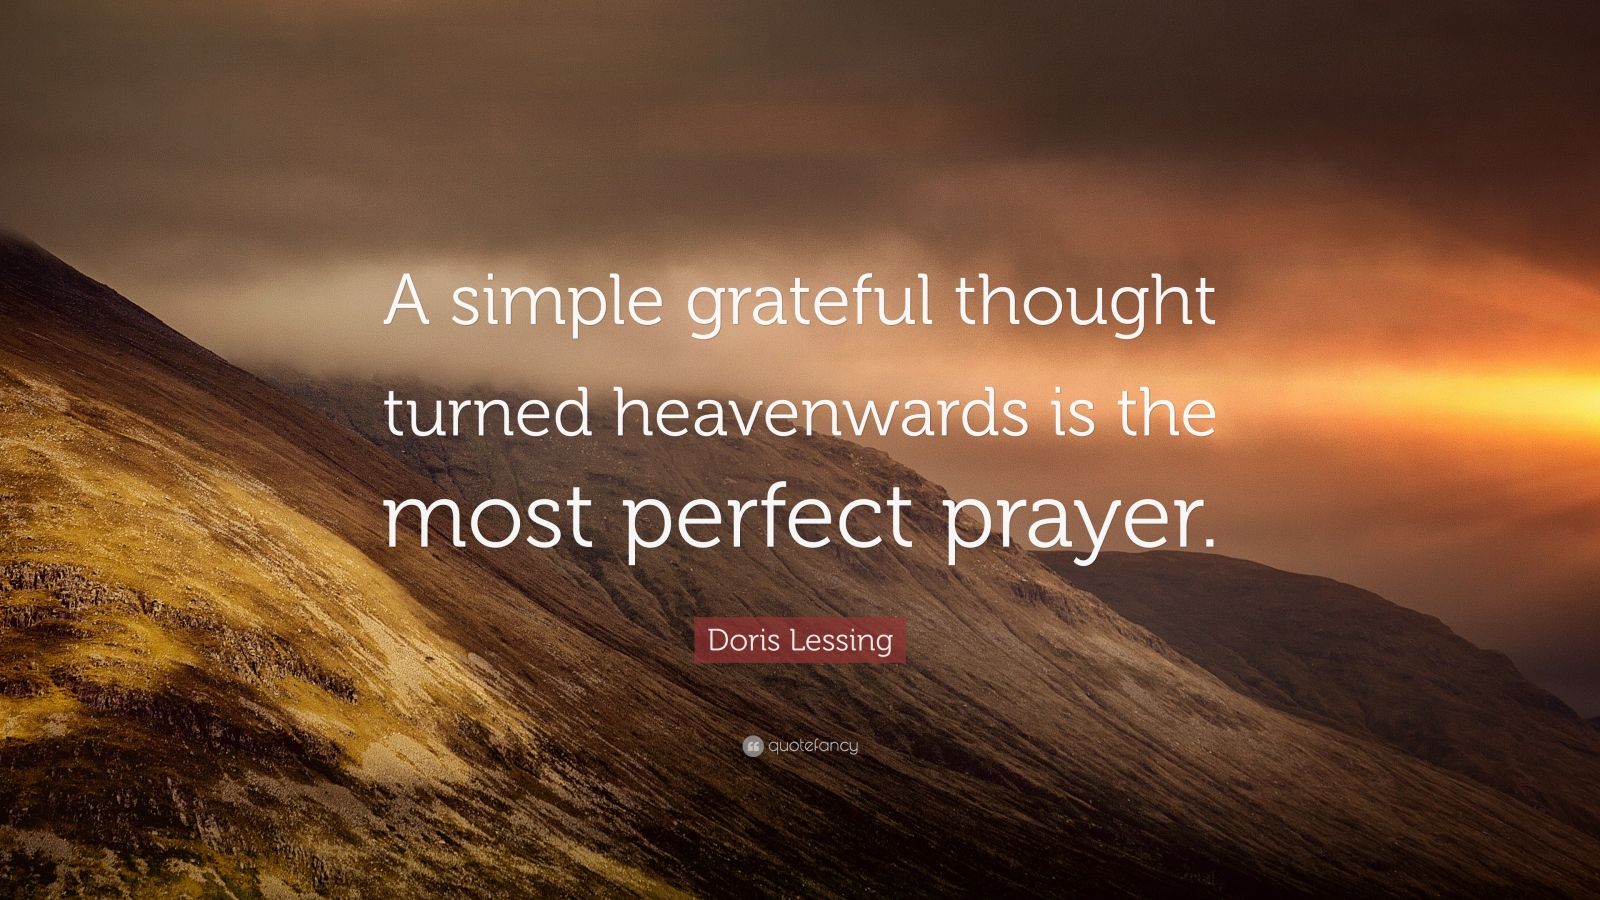 Doris Lessing Quote: “A simple grateful thought turned heavenwards is ...